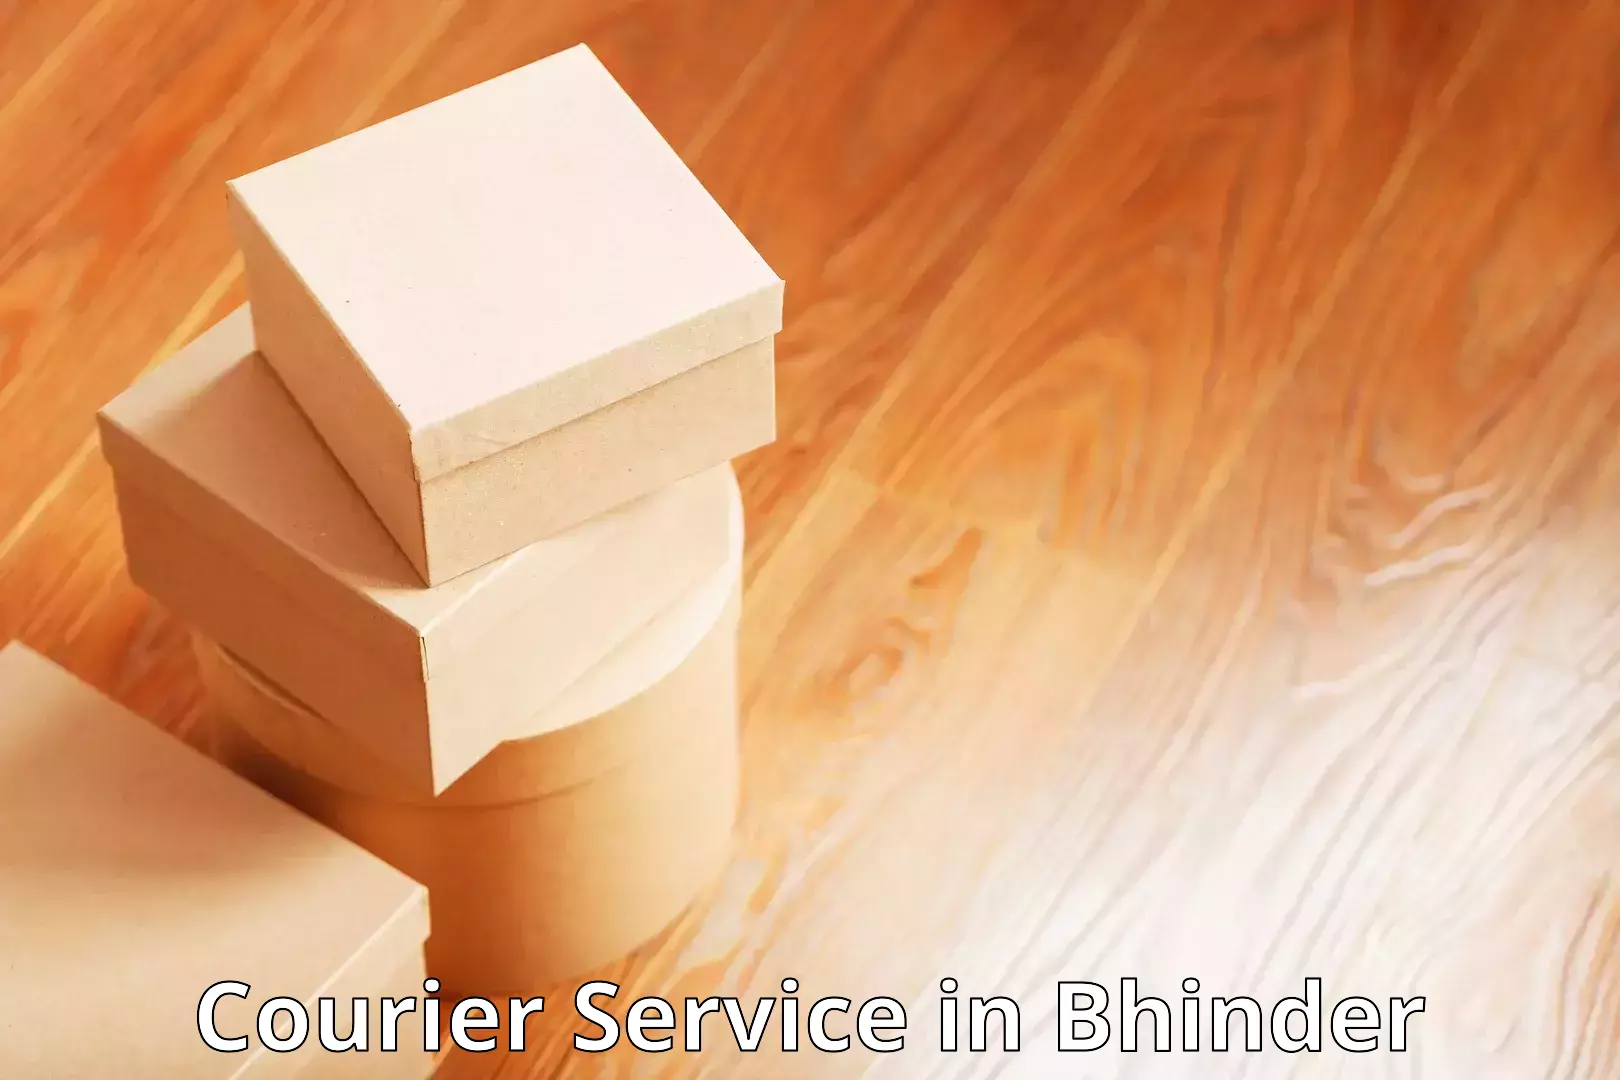 Simplified shipping solutions in Bhinder